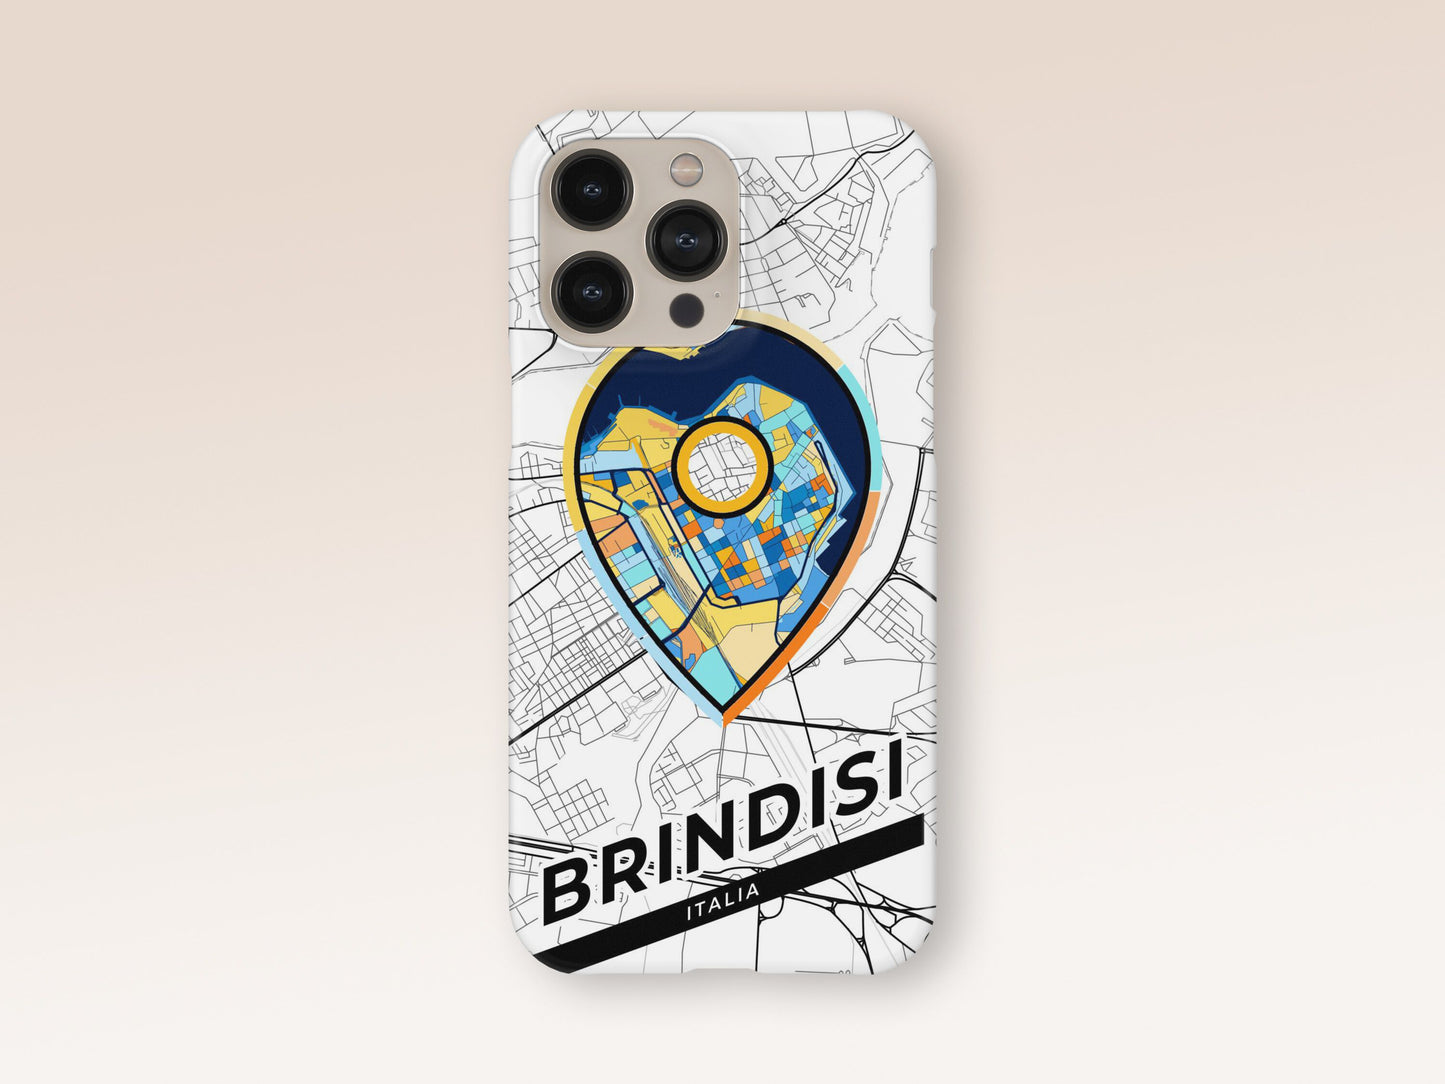 Brindisi Italy slim phone case with colorful icon. Birthday, wedding or housewarming gift. Couple match cases. 1